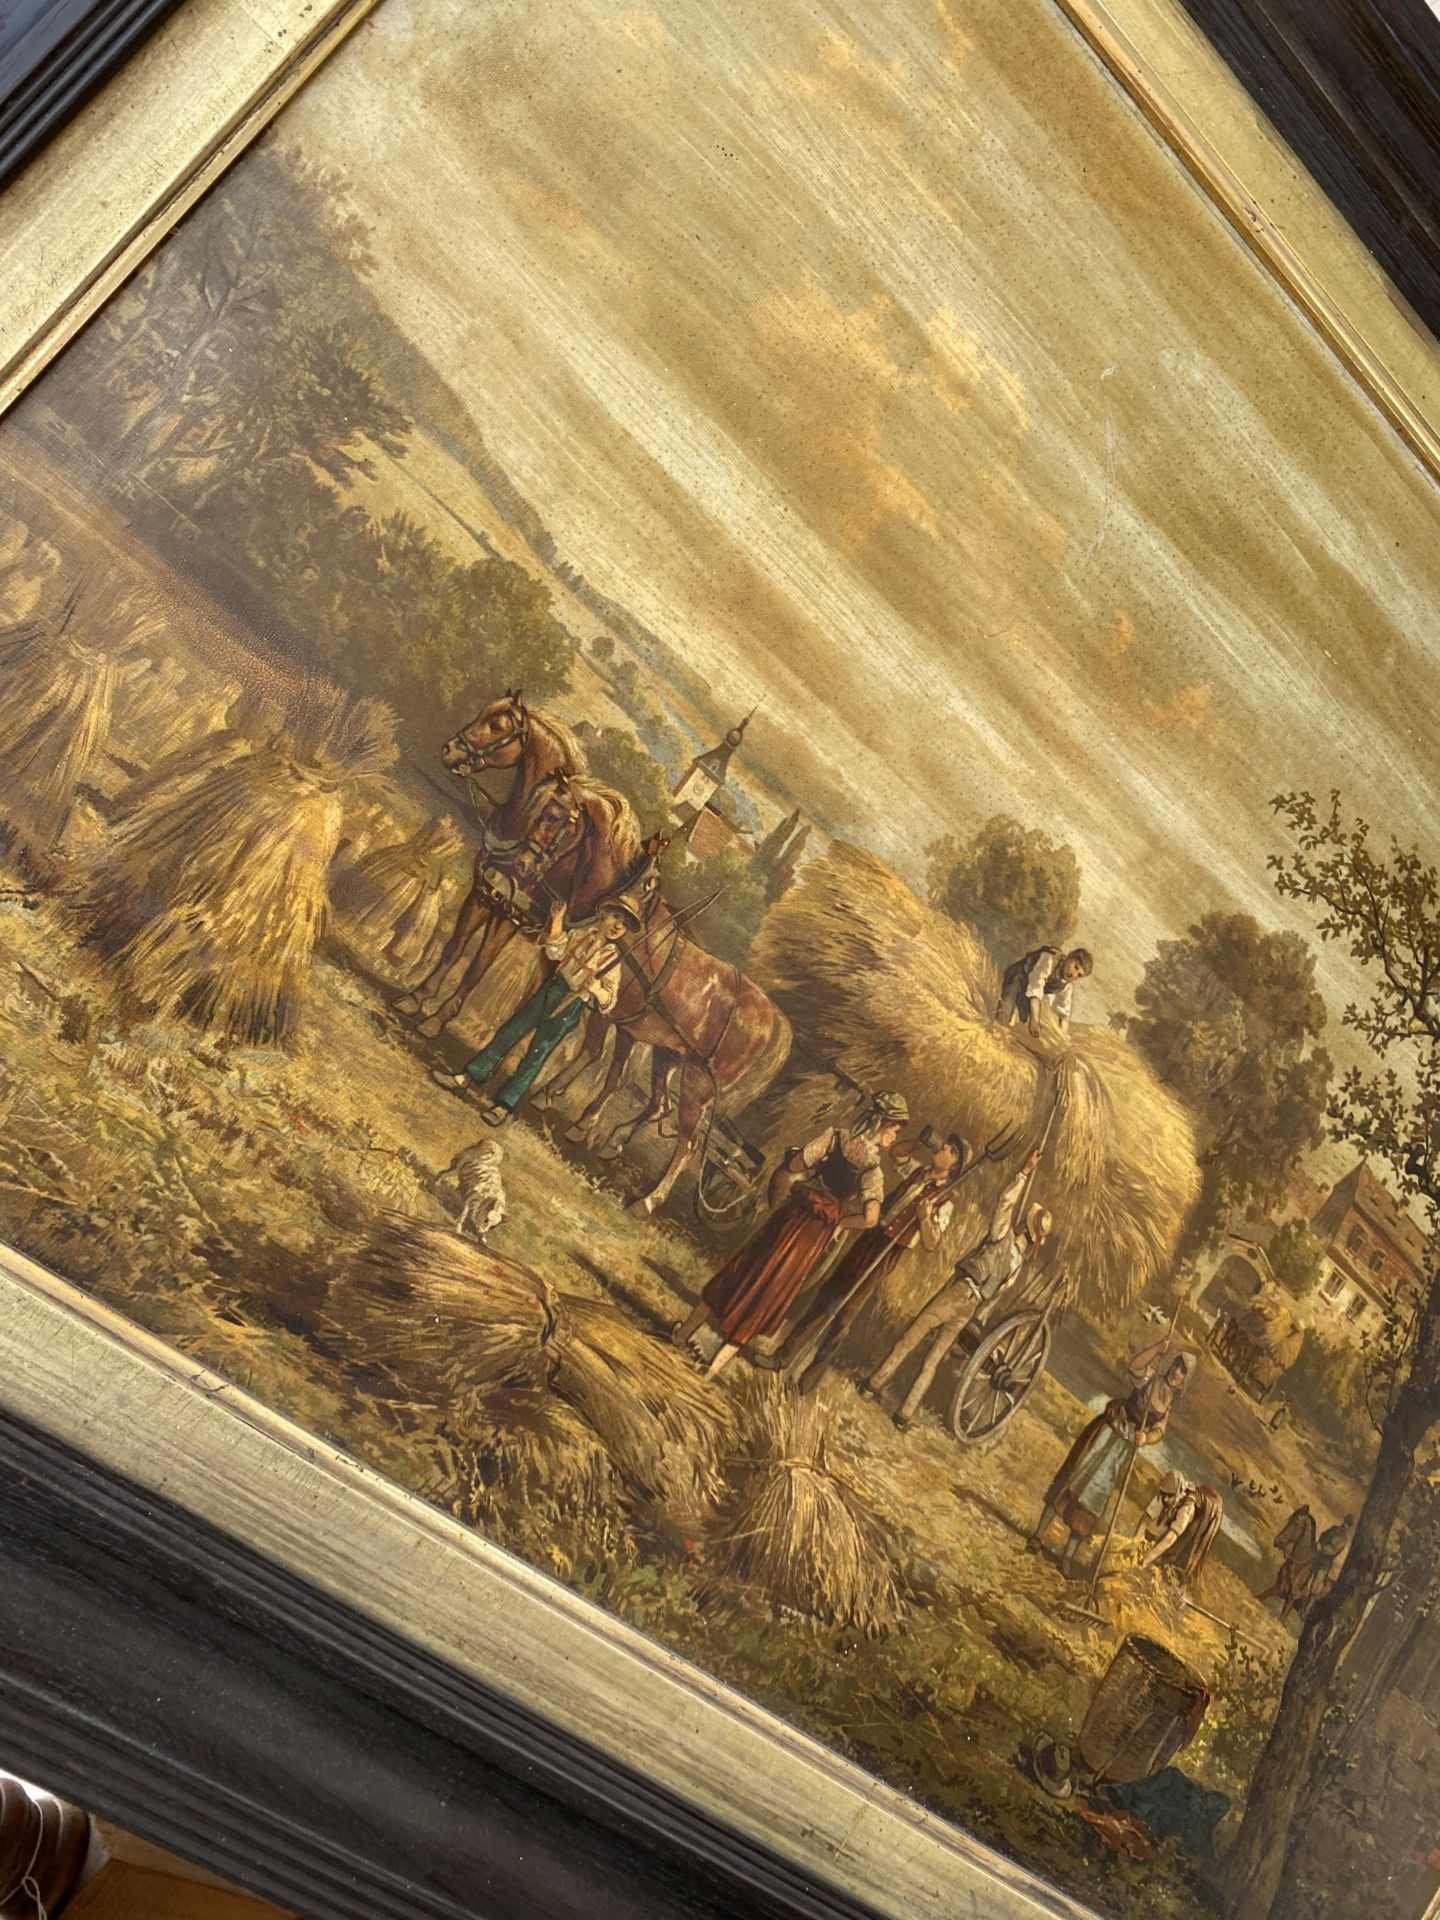 A VINTAGE PRINT ON BOARD OF A FARMING SCENE - Image 2 of 3